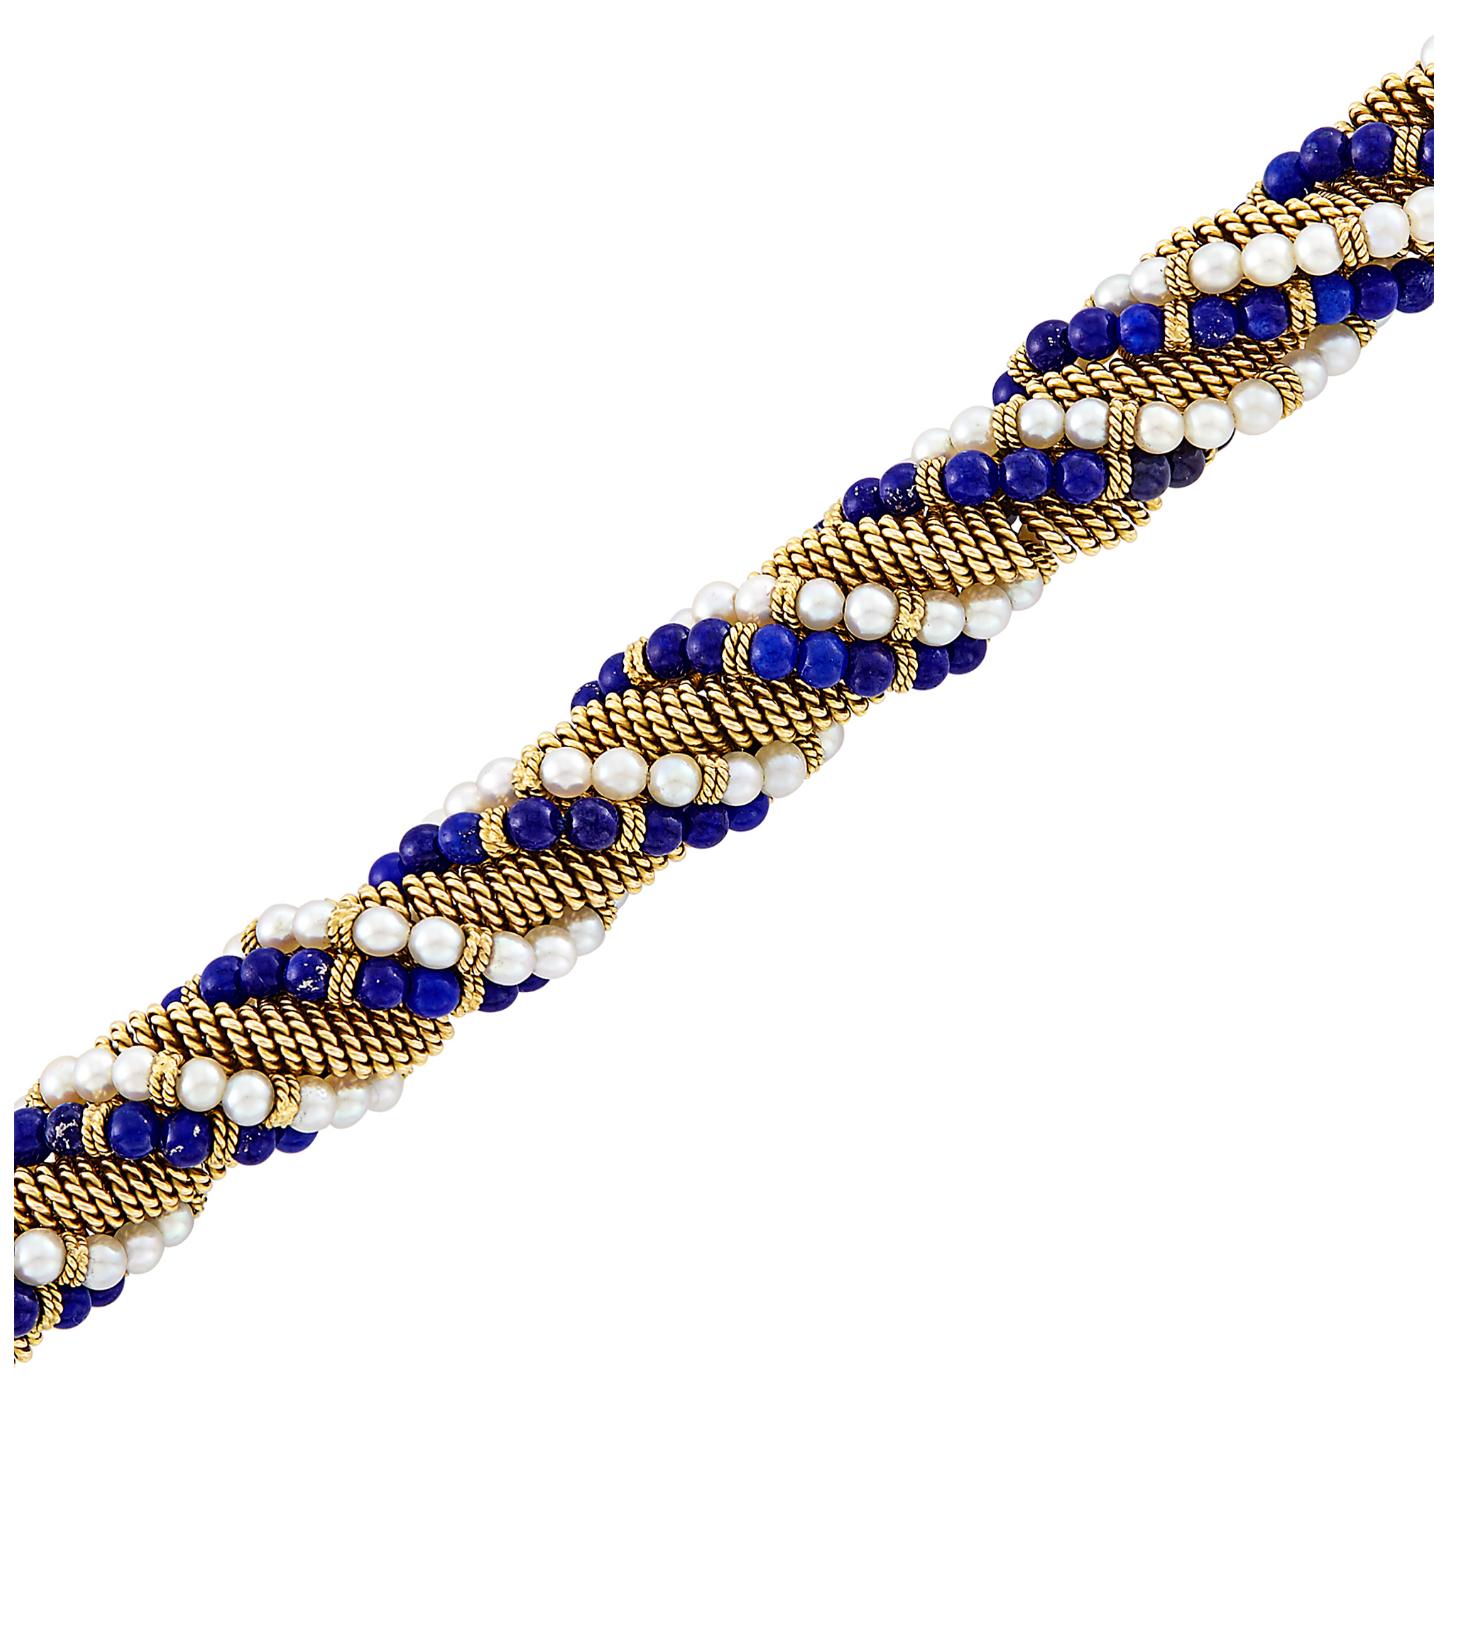 Cartier 18 karat gold bracelet composed of a rope-twist wire mesh, lined with spirals of Lapis beads approximately 3.3 to 3.2 mm., and Cultured Pearls approximately 3.3 to 3.0 mm separated with 3.0mm rope rondells signed Cartier, Italy, no. 55508,